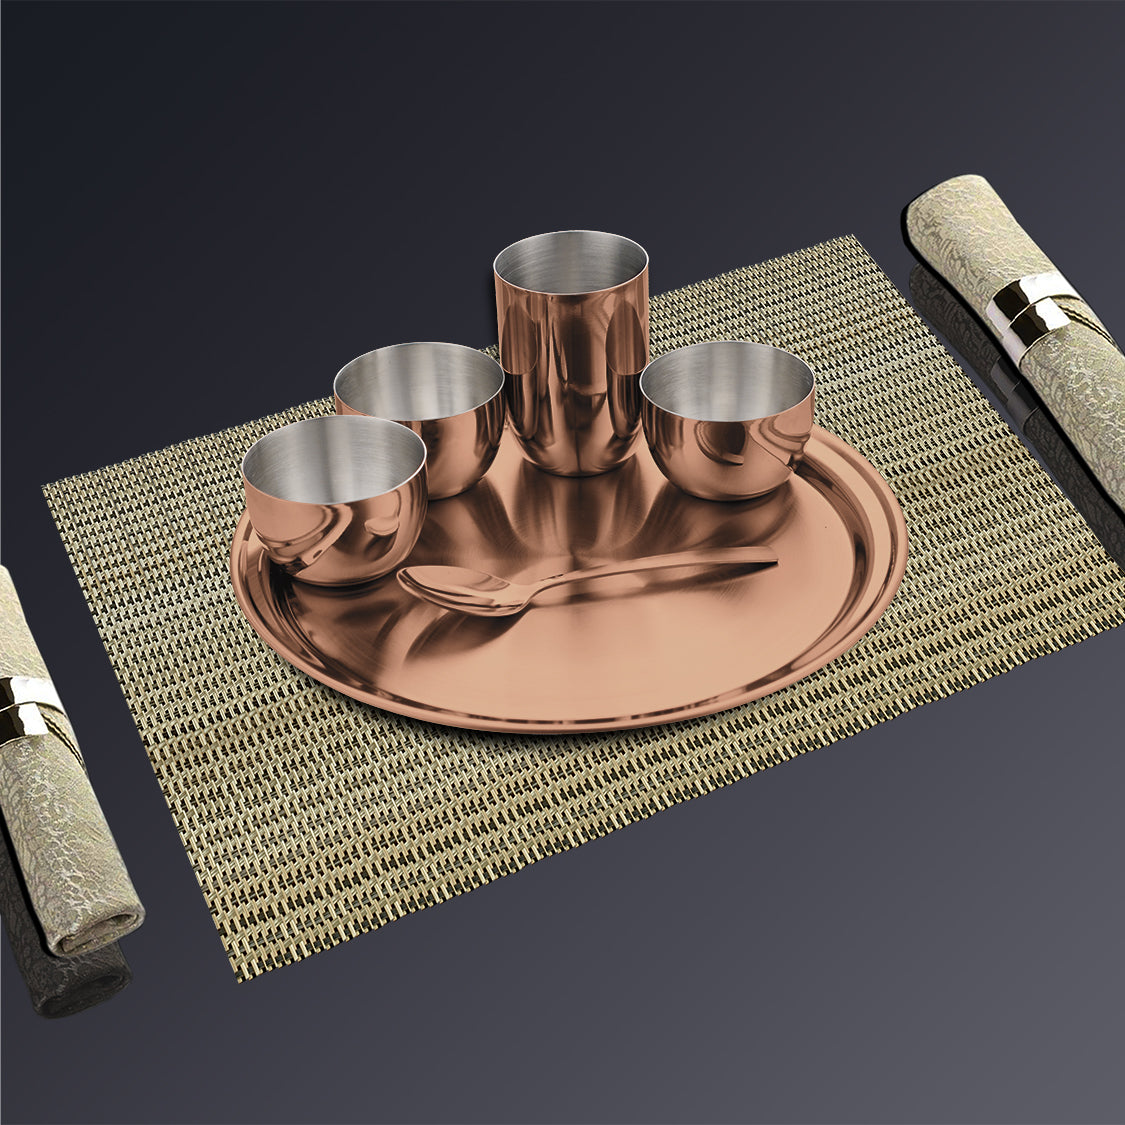 Stainless Steel Thali Set with Rose Gold PVD Coating Majestic